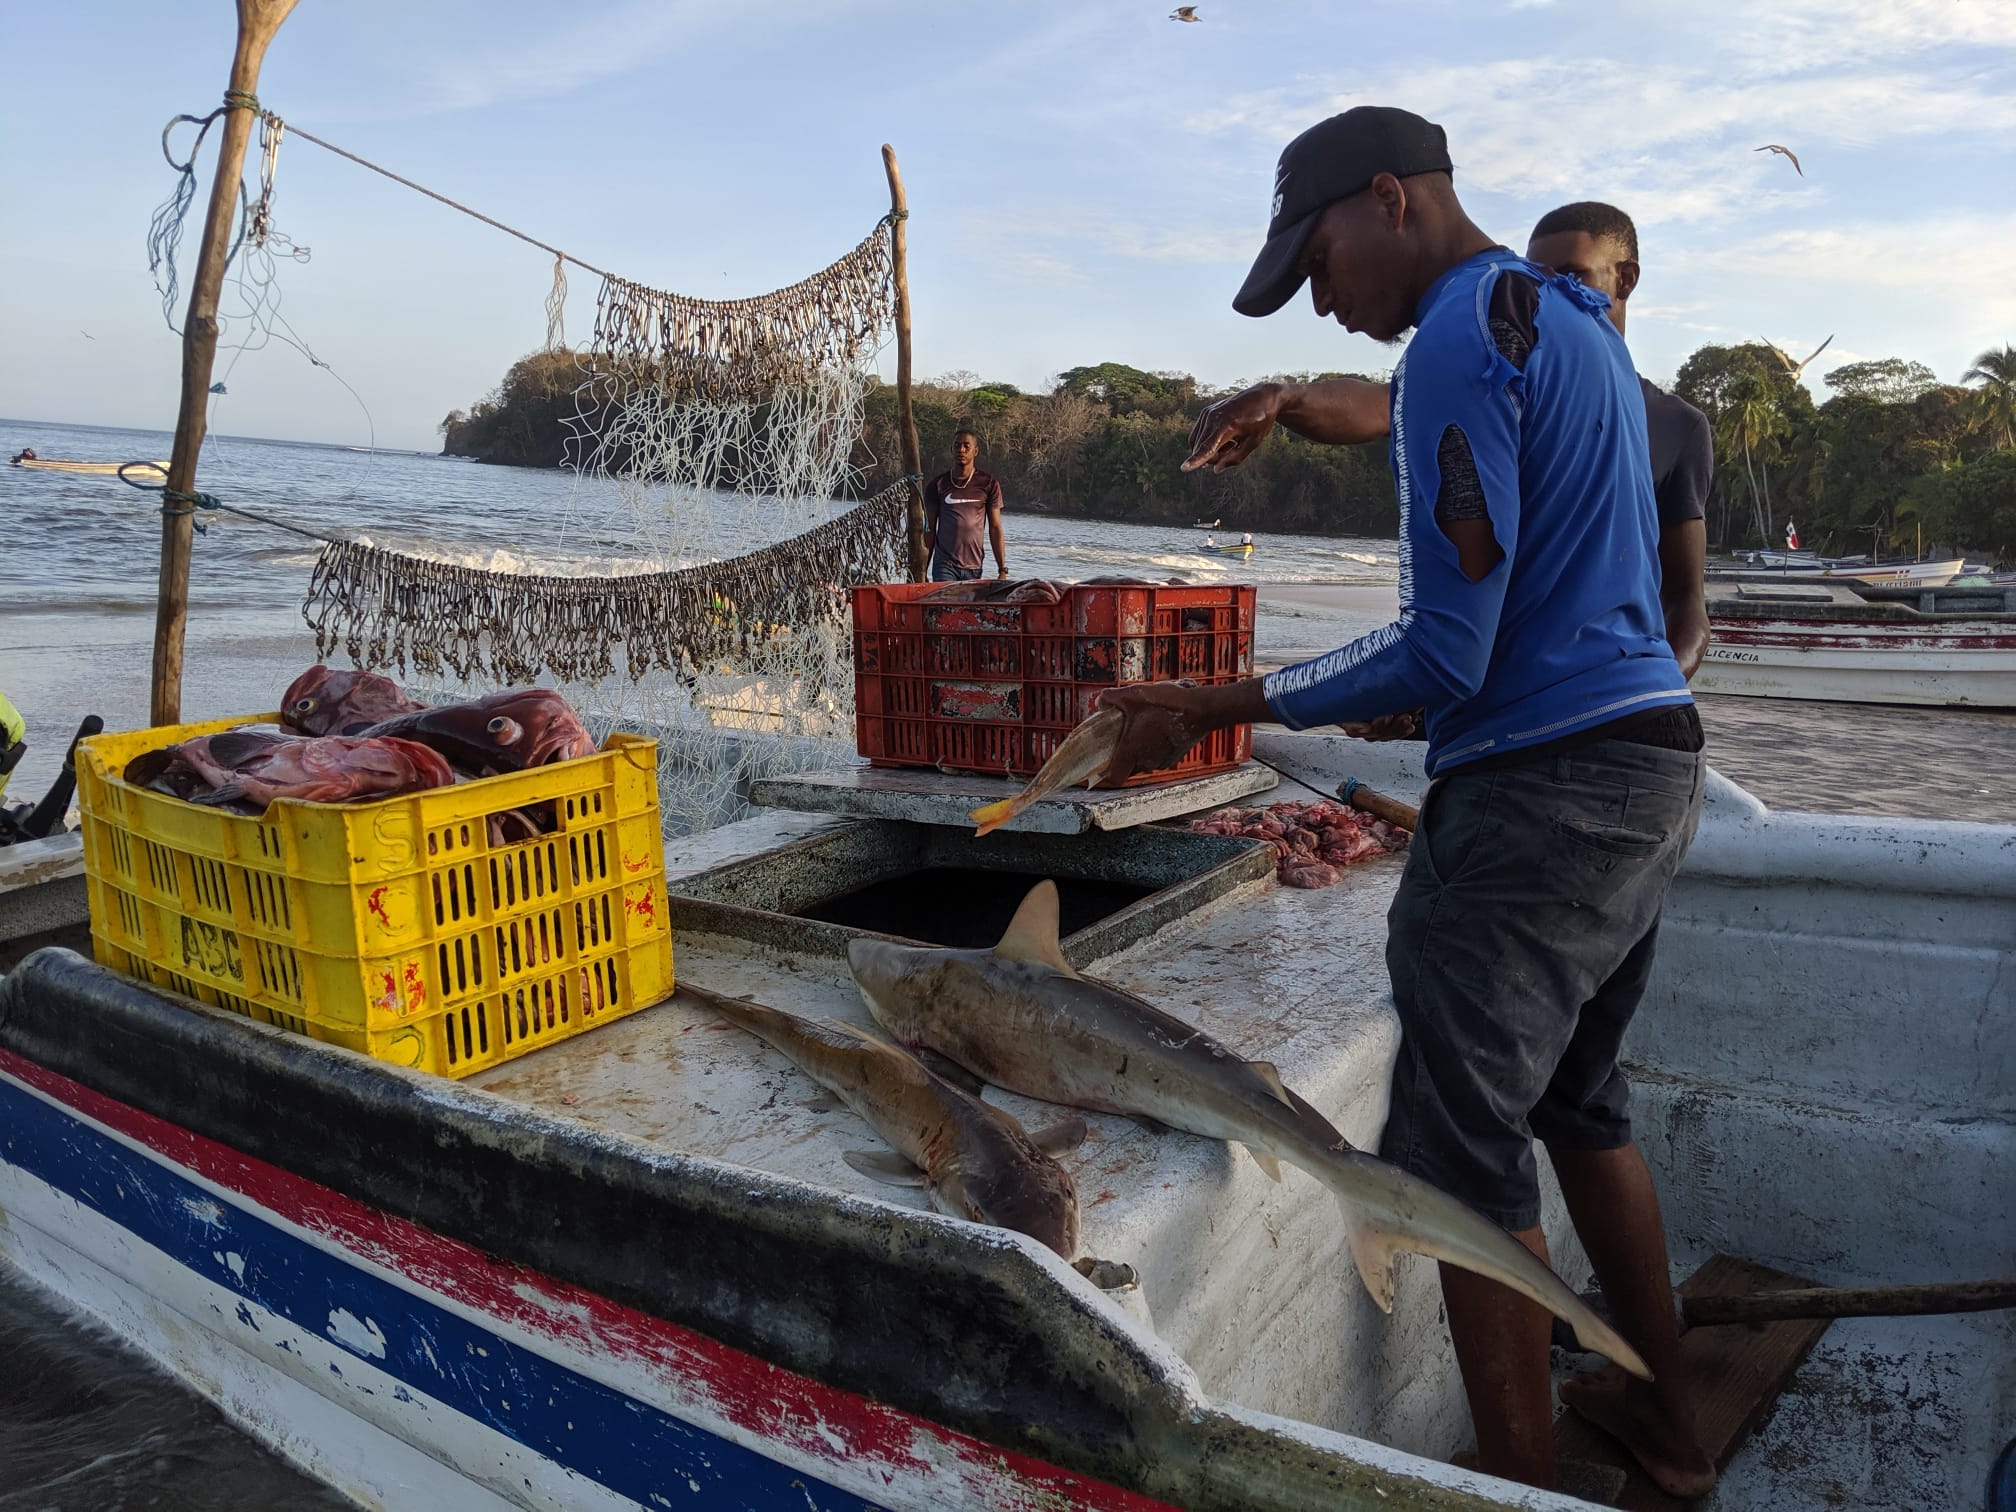 A fisherman in Panama cuts up his daily catch, which includes juvenile sharks.